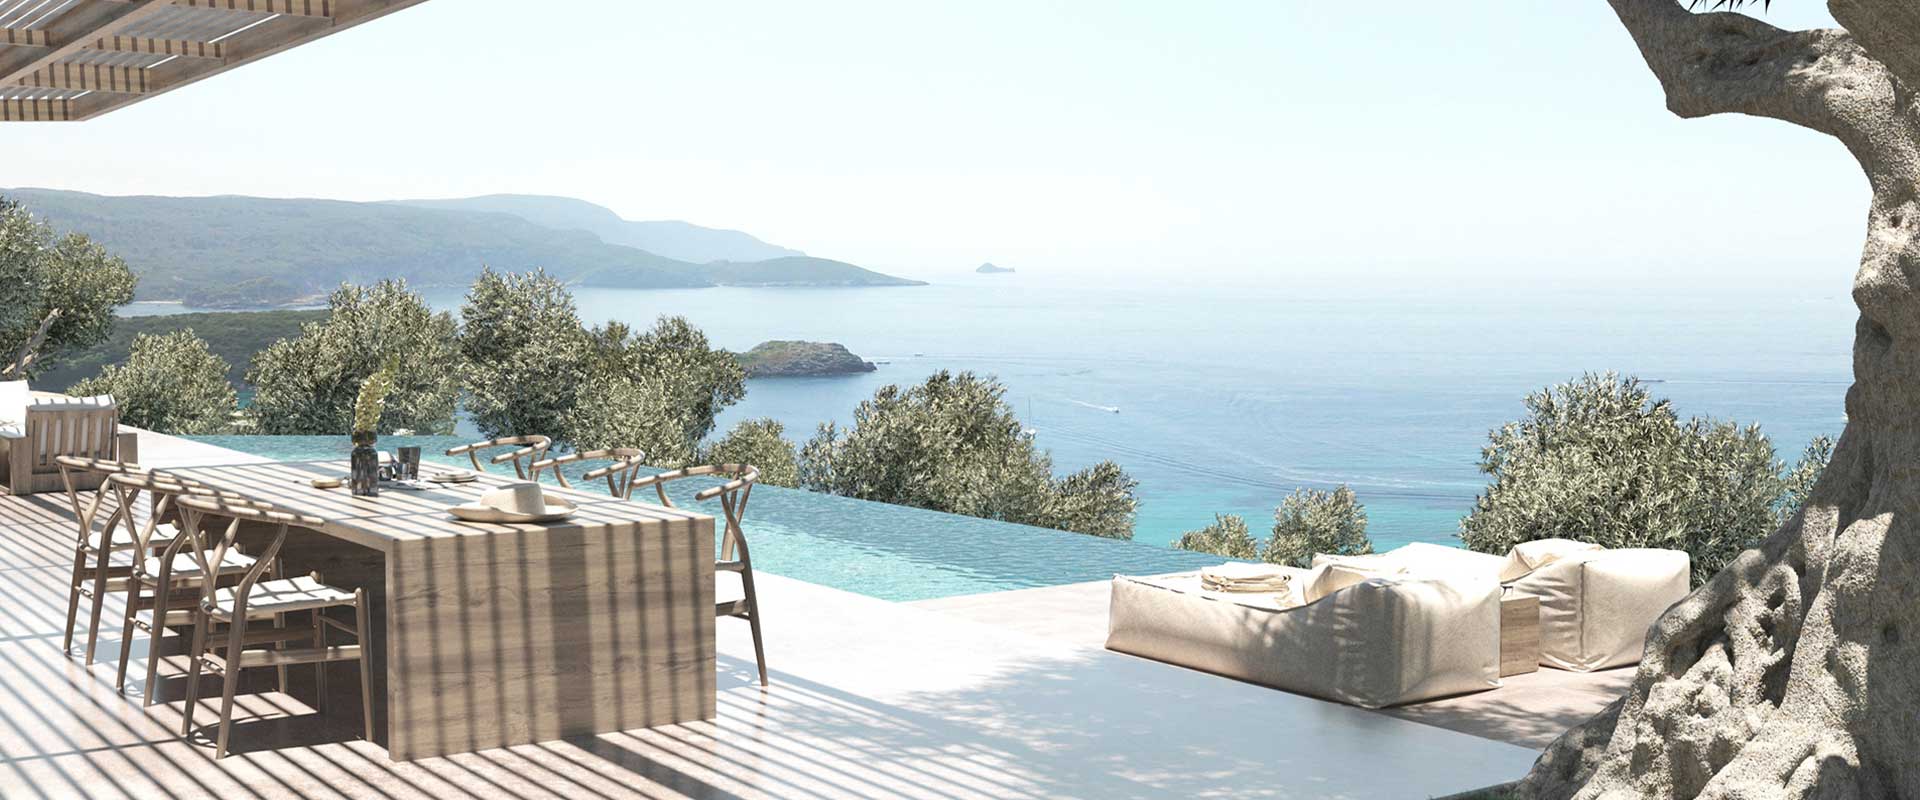 Discover Your Ideal Property in Lefkada: Land, Waterfront Villas, and More!